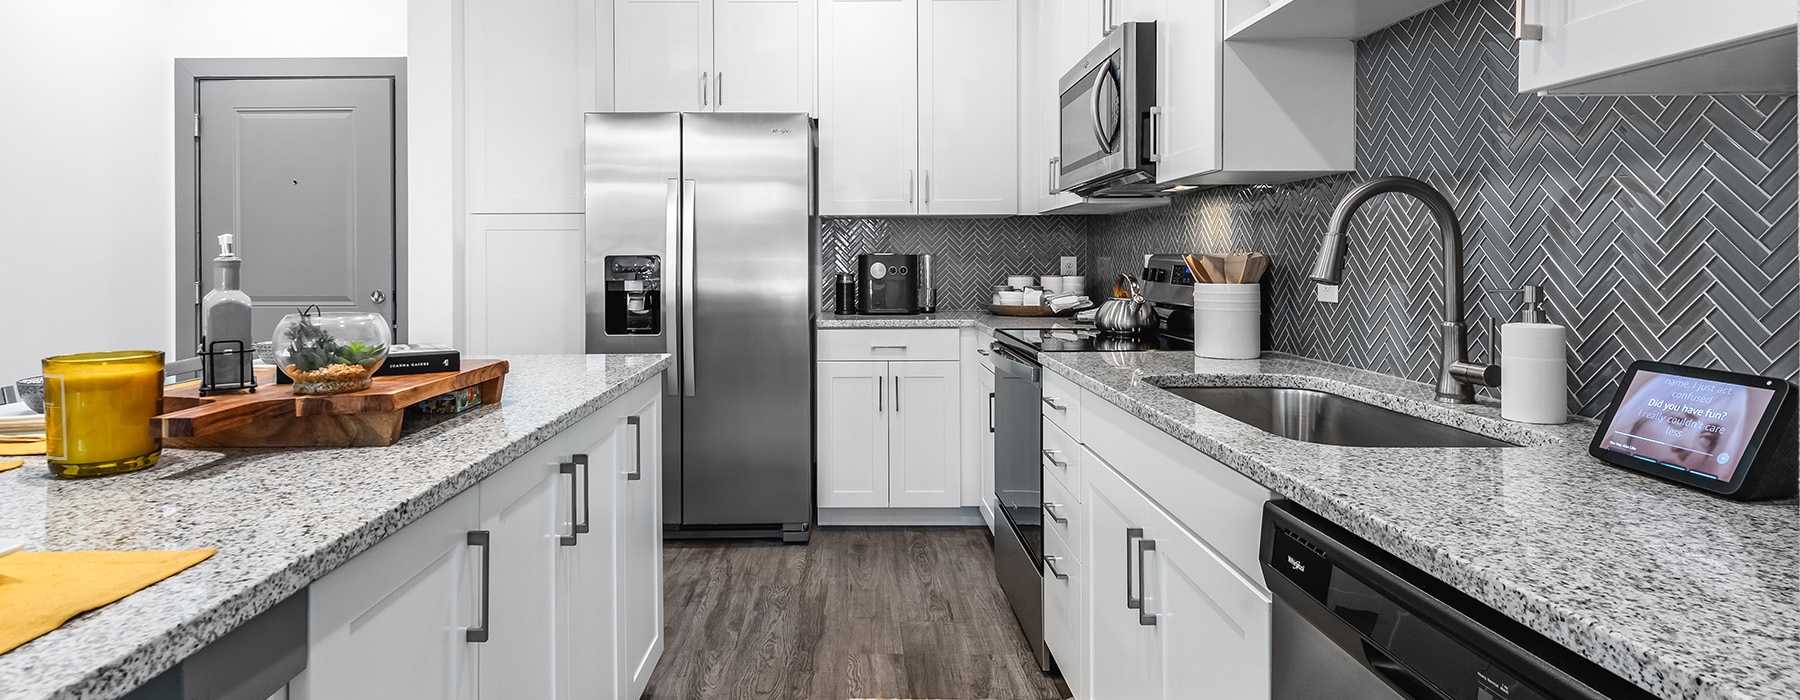 Kitchen space with modern backsplash and countertops, stainless steel appliances, and lots of storage space